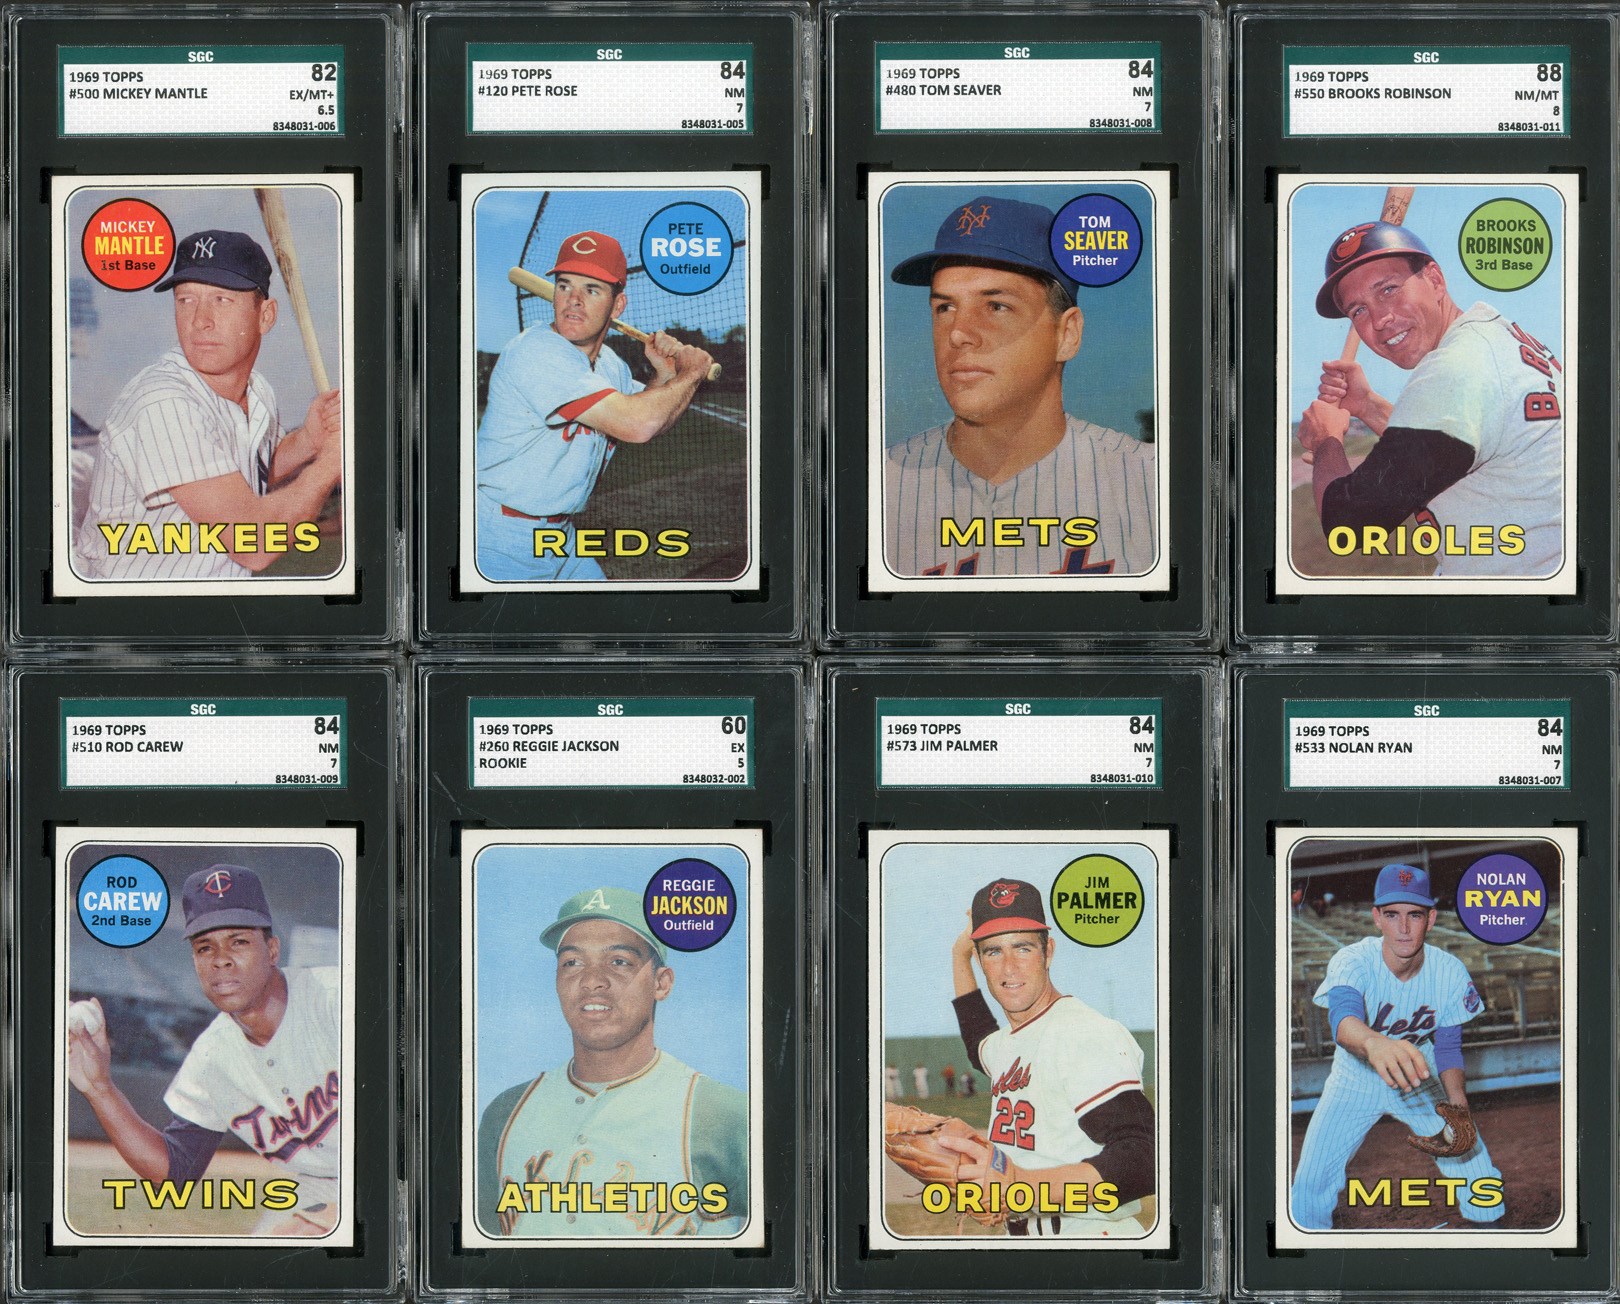 1969 Topps Complete Set (664 Cards - 8 SGC Graded)